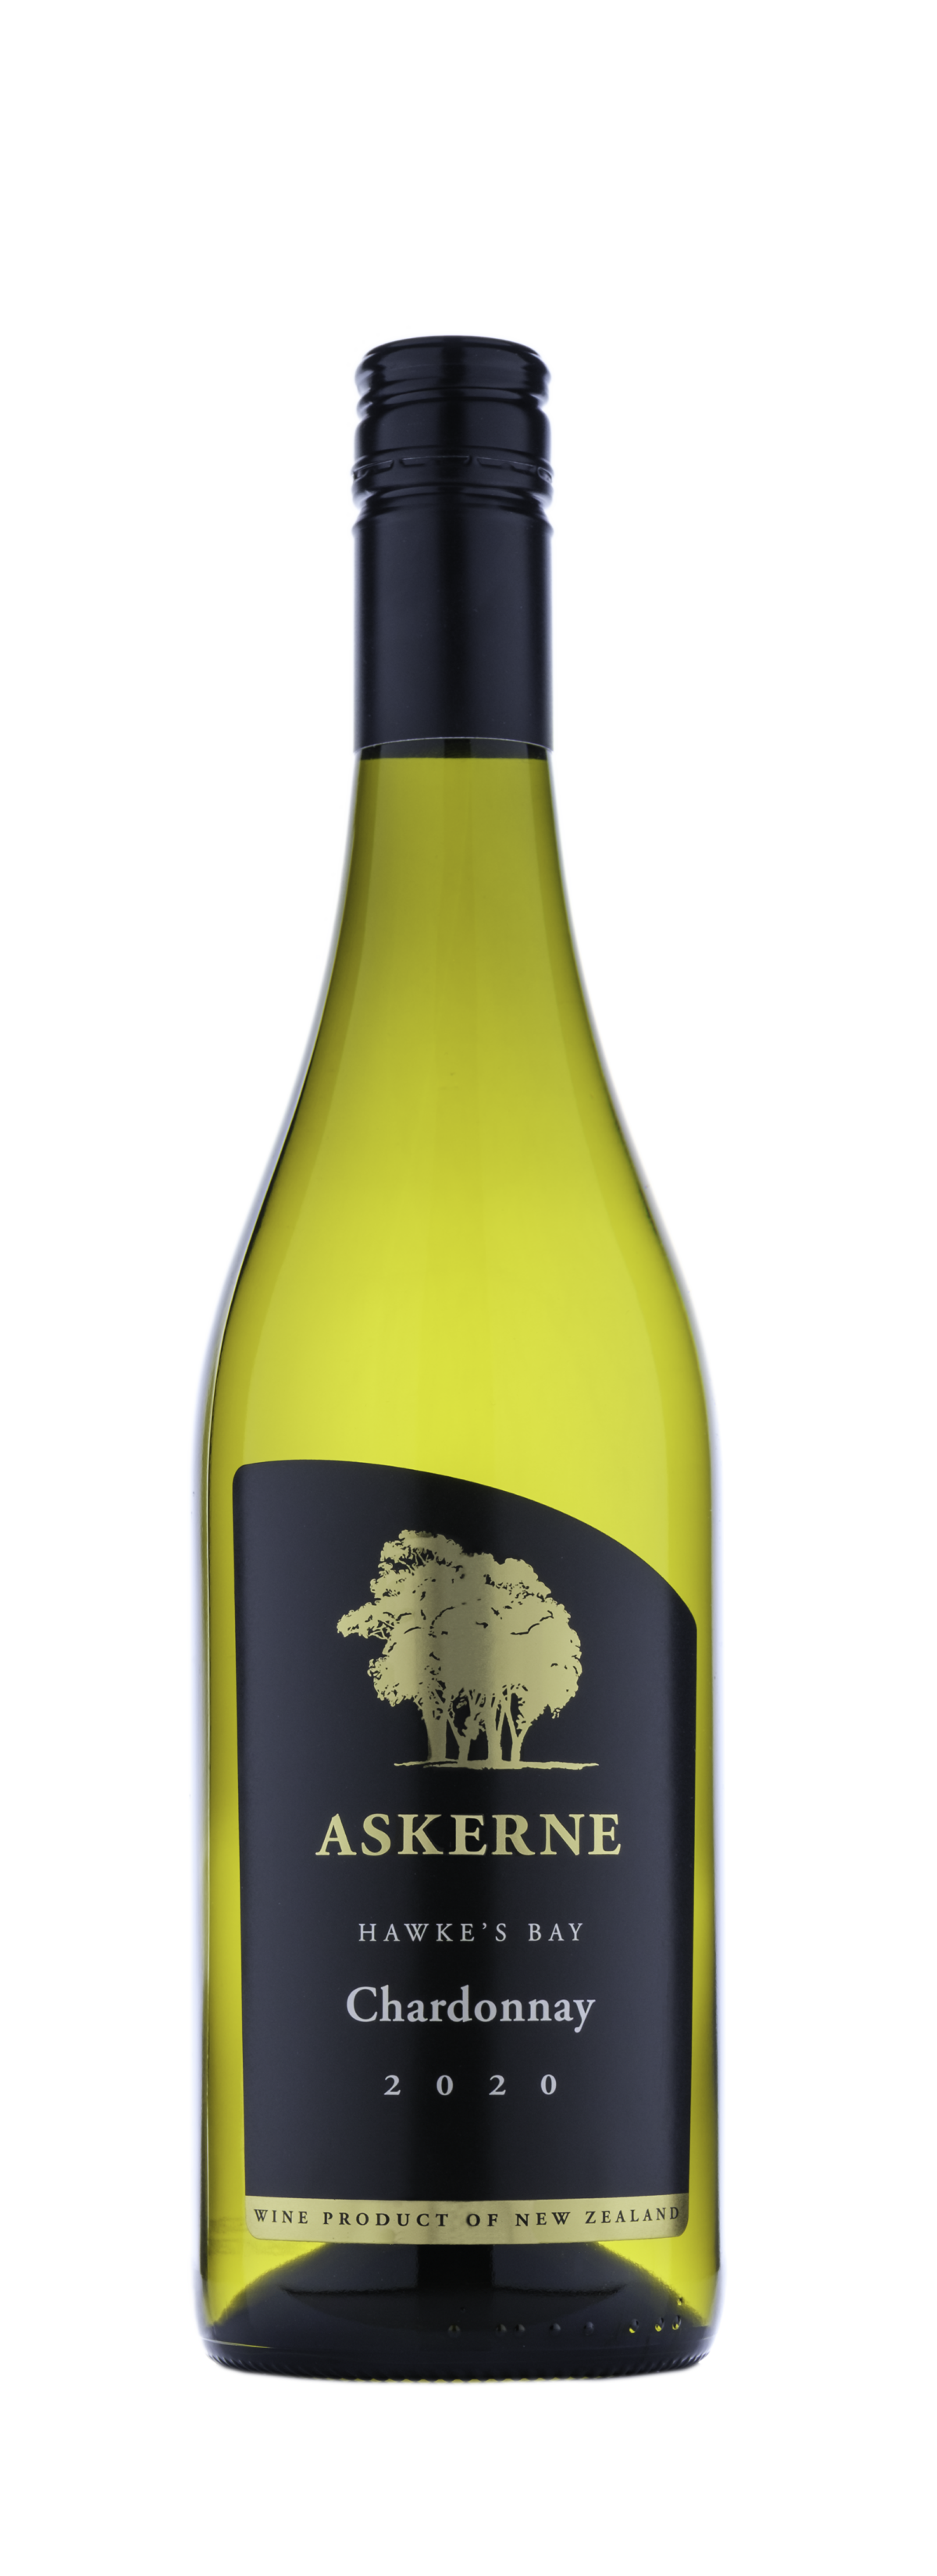 Award winning Boutique Family owned Askerne Chardonnay 2020